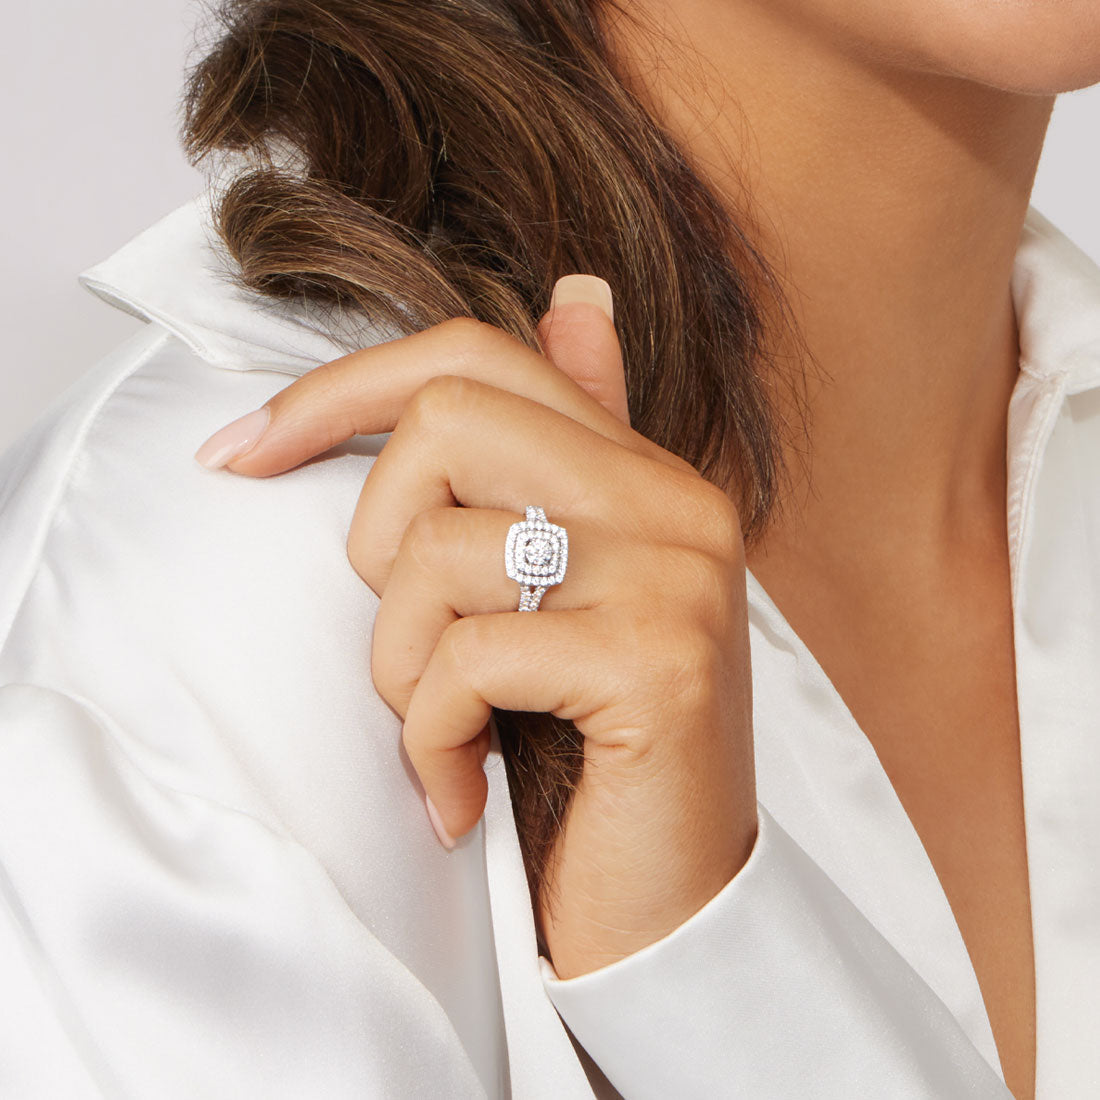 Love by Michelle Beville Halo Solitaire Ring with 1.00ct of Diamonds in 18ct White Gold Rings Bevilles 